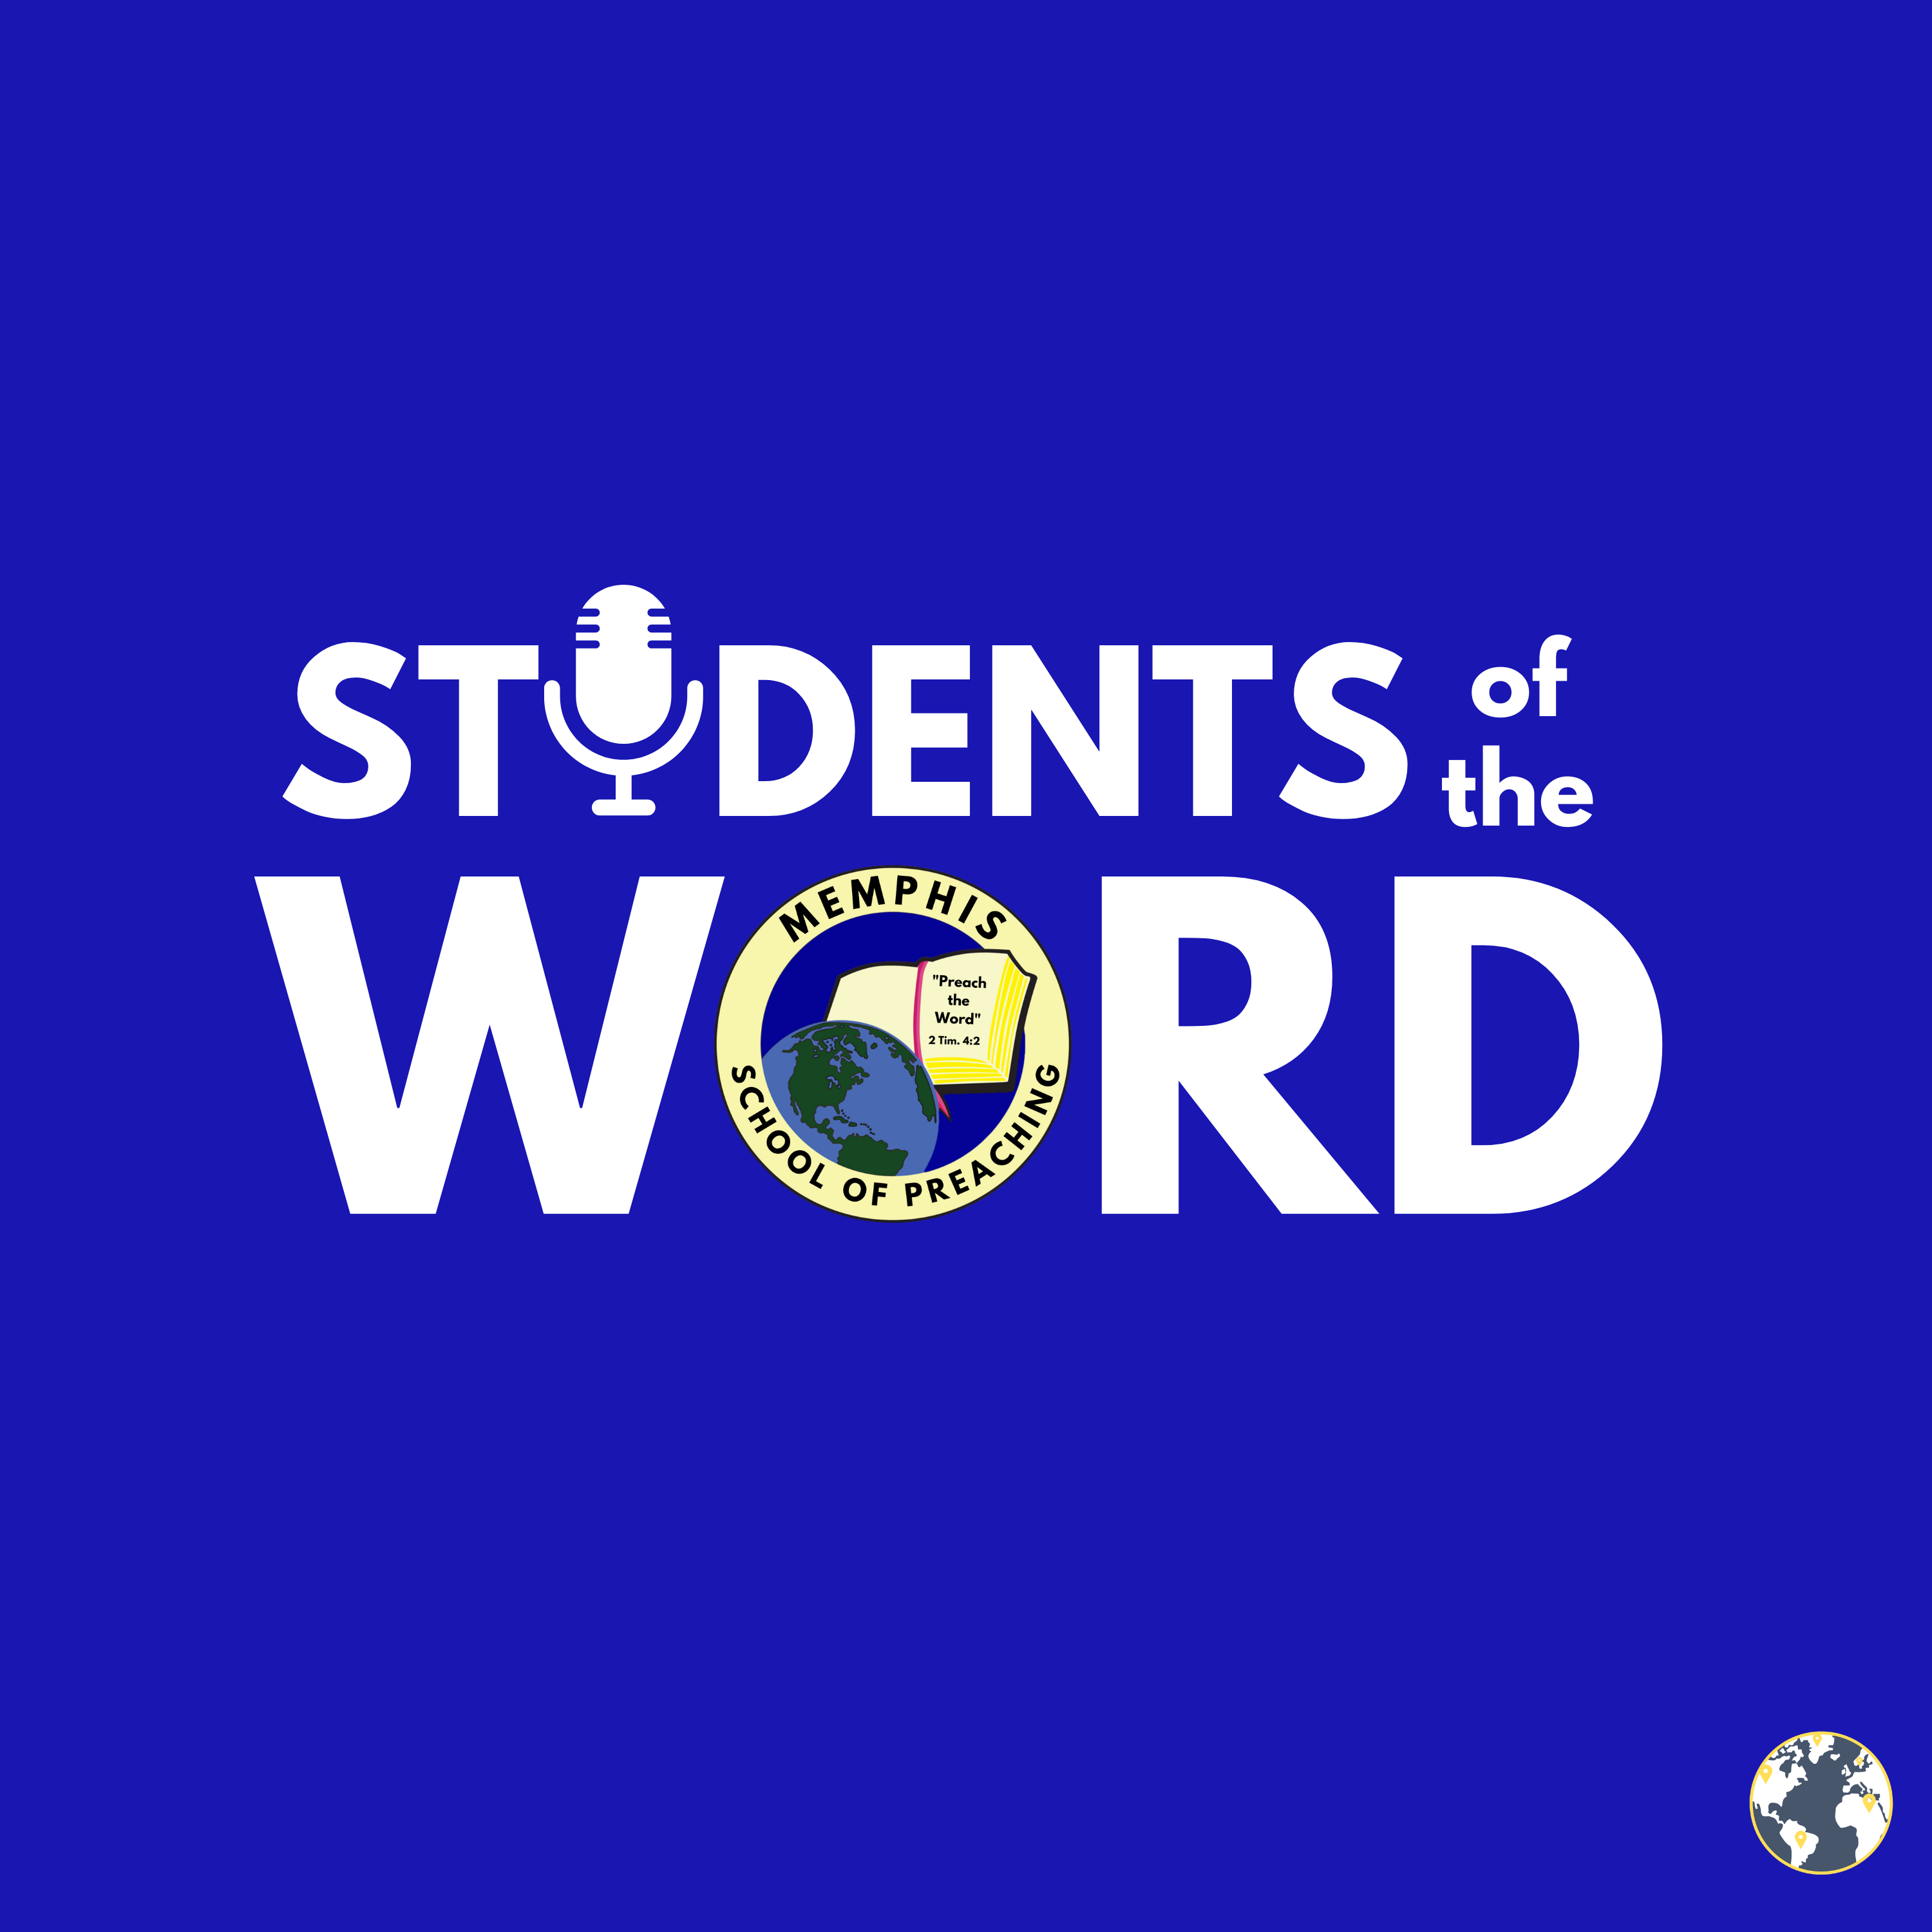 Artwork for Students of the Word (MSOP)